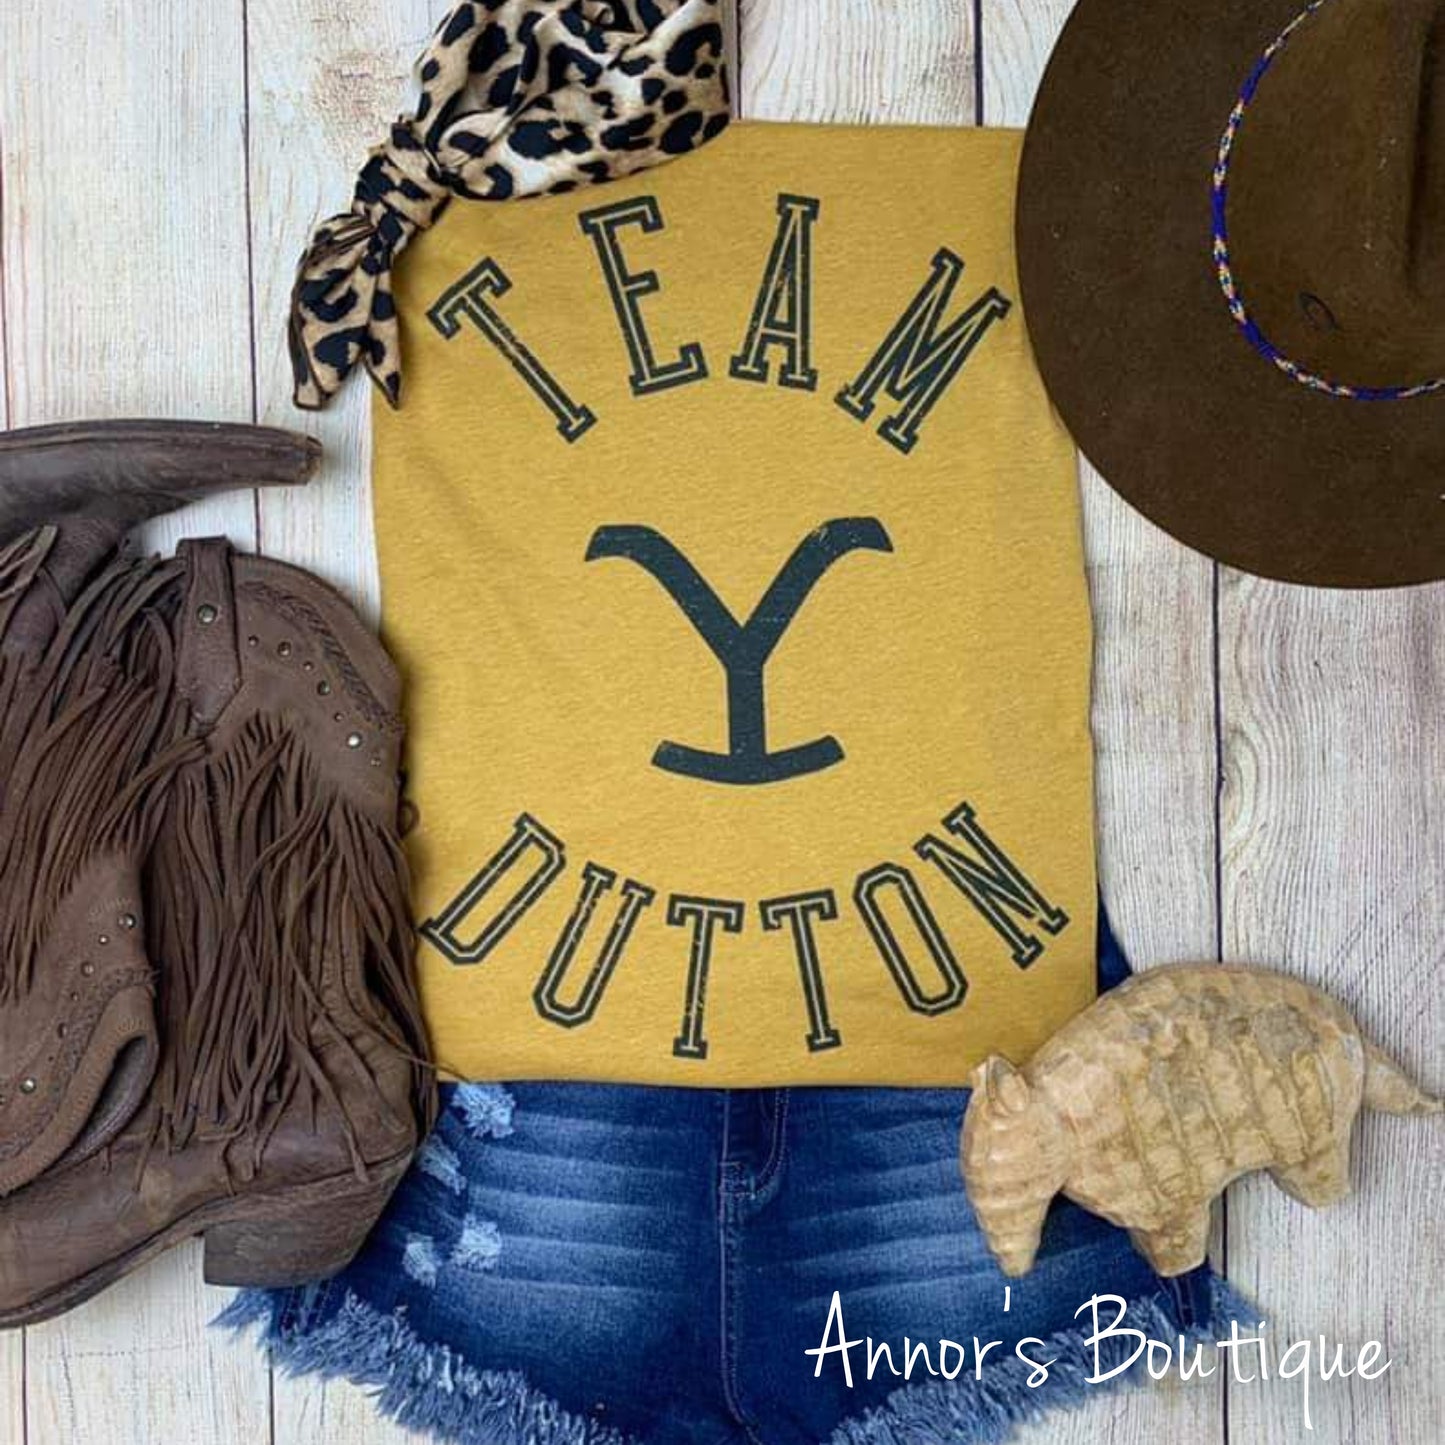 Yellowstone Tees - Annor's Boutique